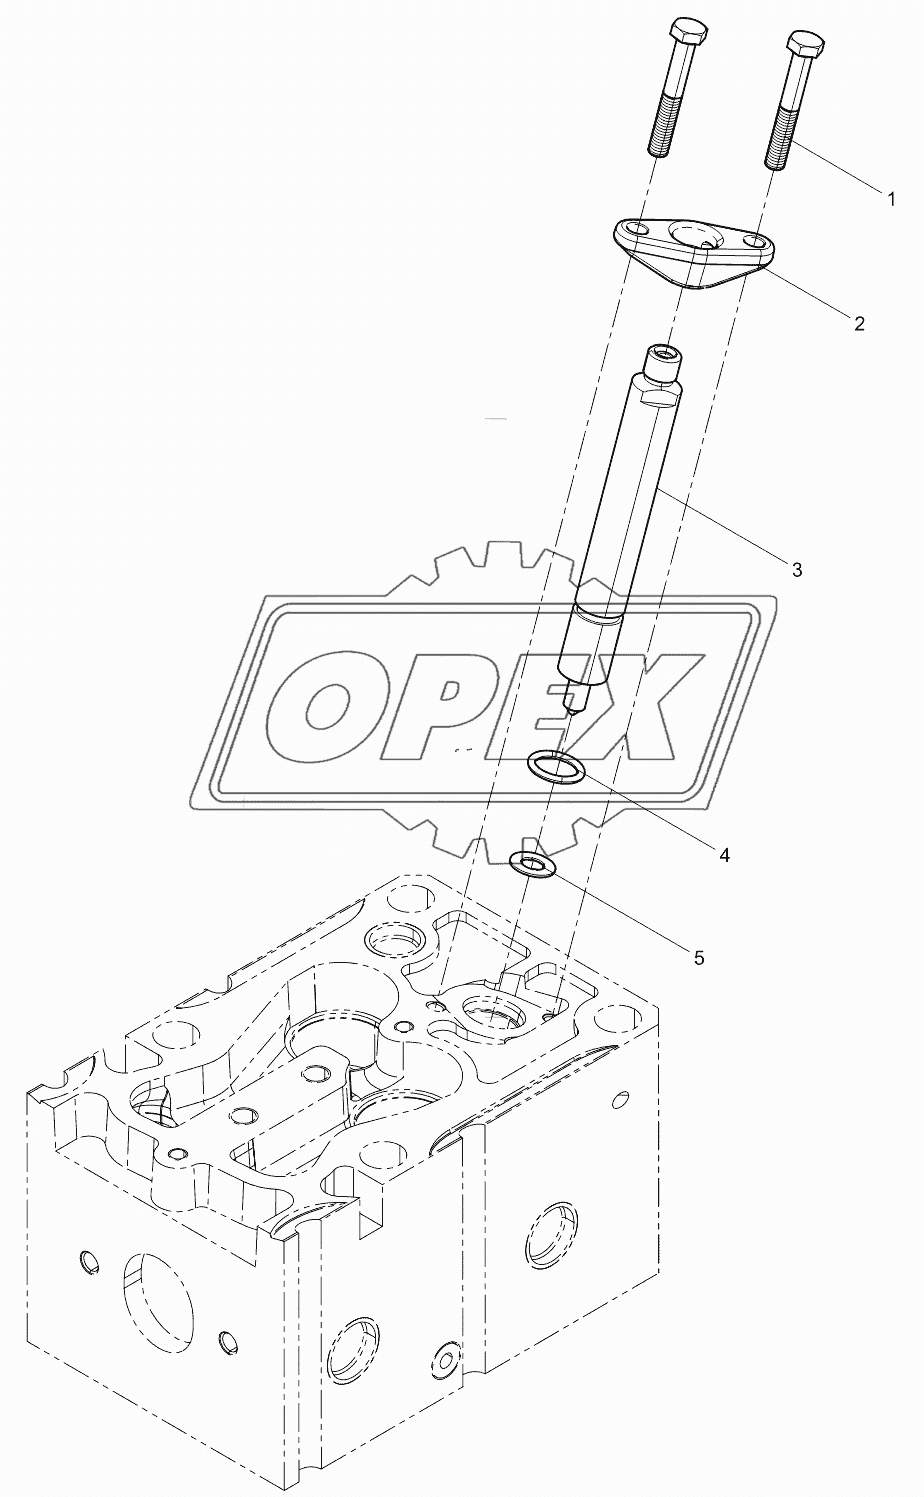 Injector assembly